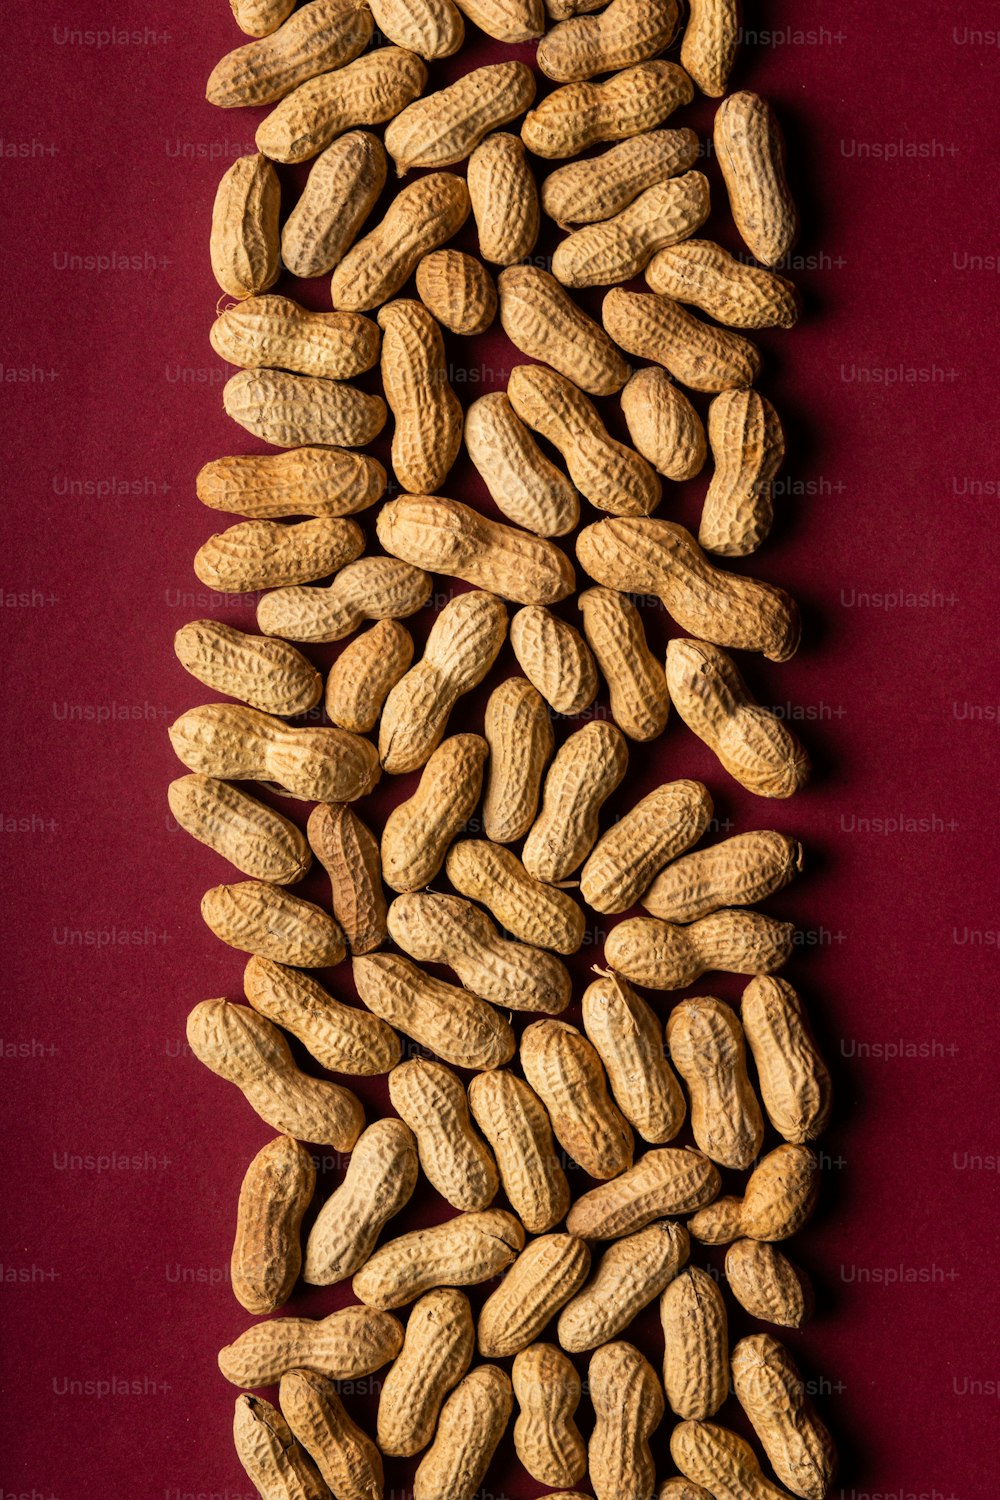 a pile of peanuts